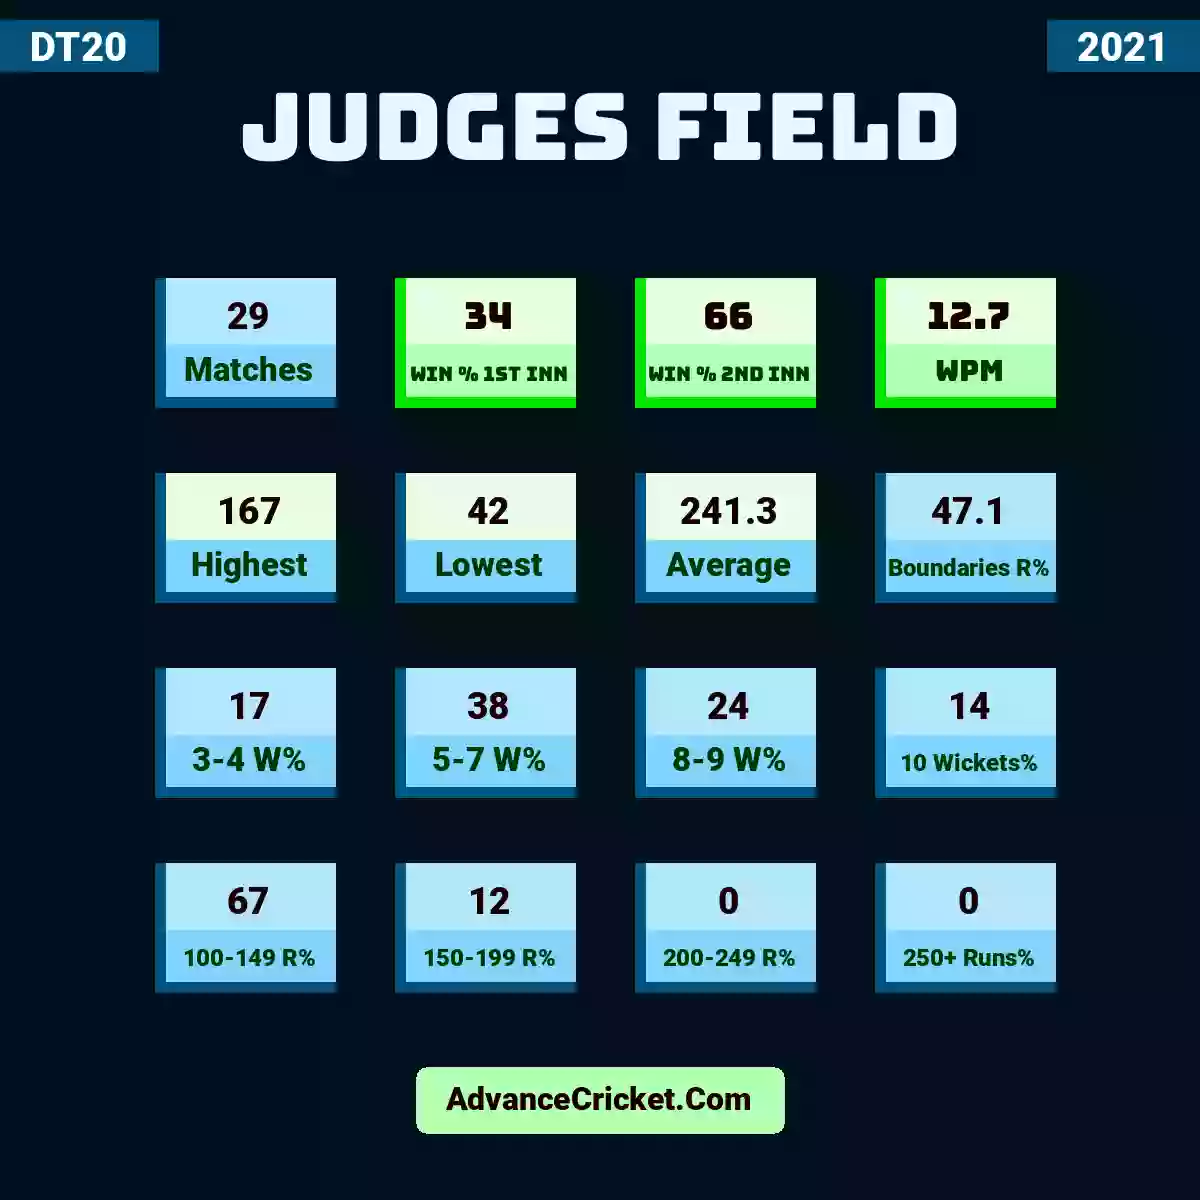 Image showing Judges Field with Matches: 29, Win % 1st Inn: 34, Win % 2nd Inn: 66, WPM: 12.7, Highest: 167, Lowest: 42, Average: 241.3, Boundaries R%: 47.1, 3-4 W%: 17, 5-7 W%: 38, 8-9 W%: 24, 10 Wickets%: 14, 100-149 R%: 67, 150-199 R%: 12, 200-249 R%: 0, 250+ Runs%: 0.